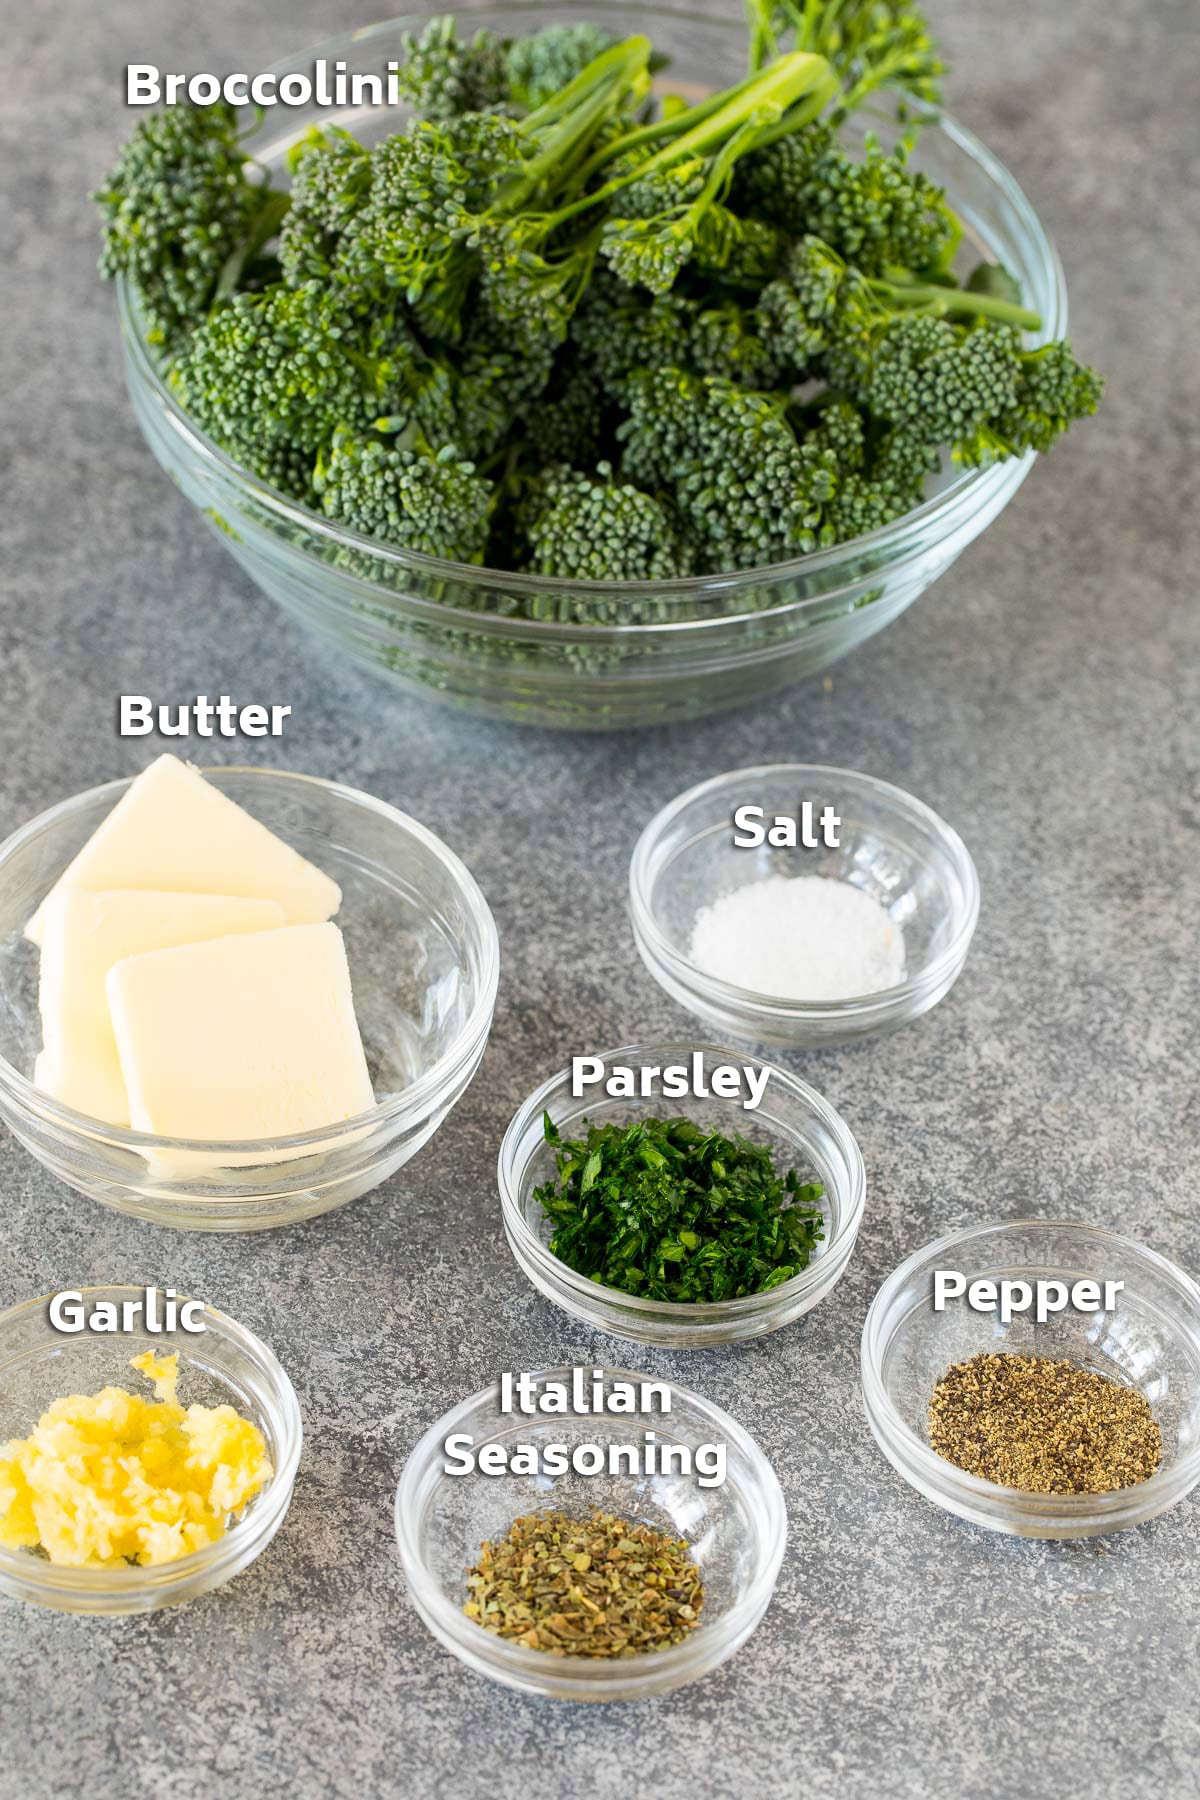 Bowls of ingredients including baby broccoli, butter and seasonings.